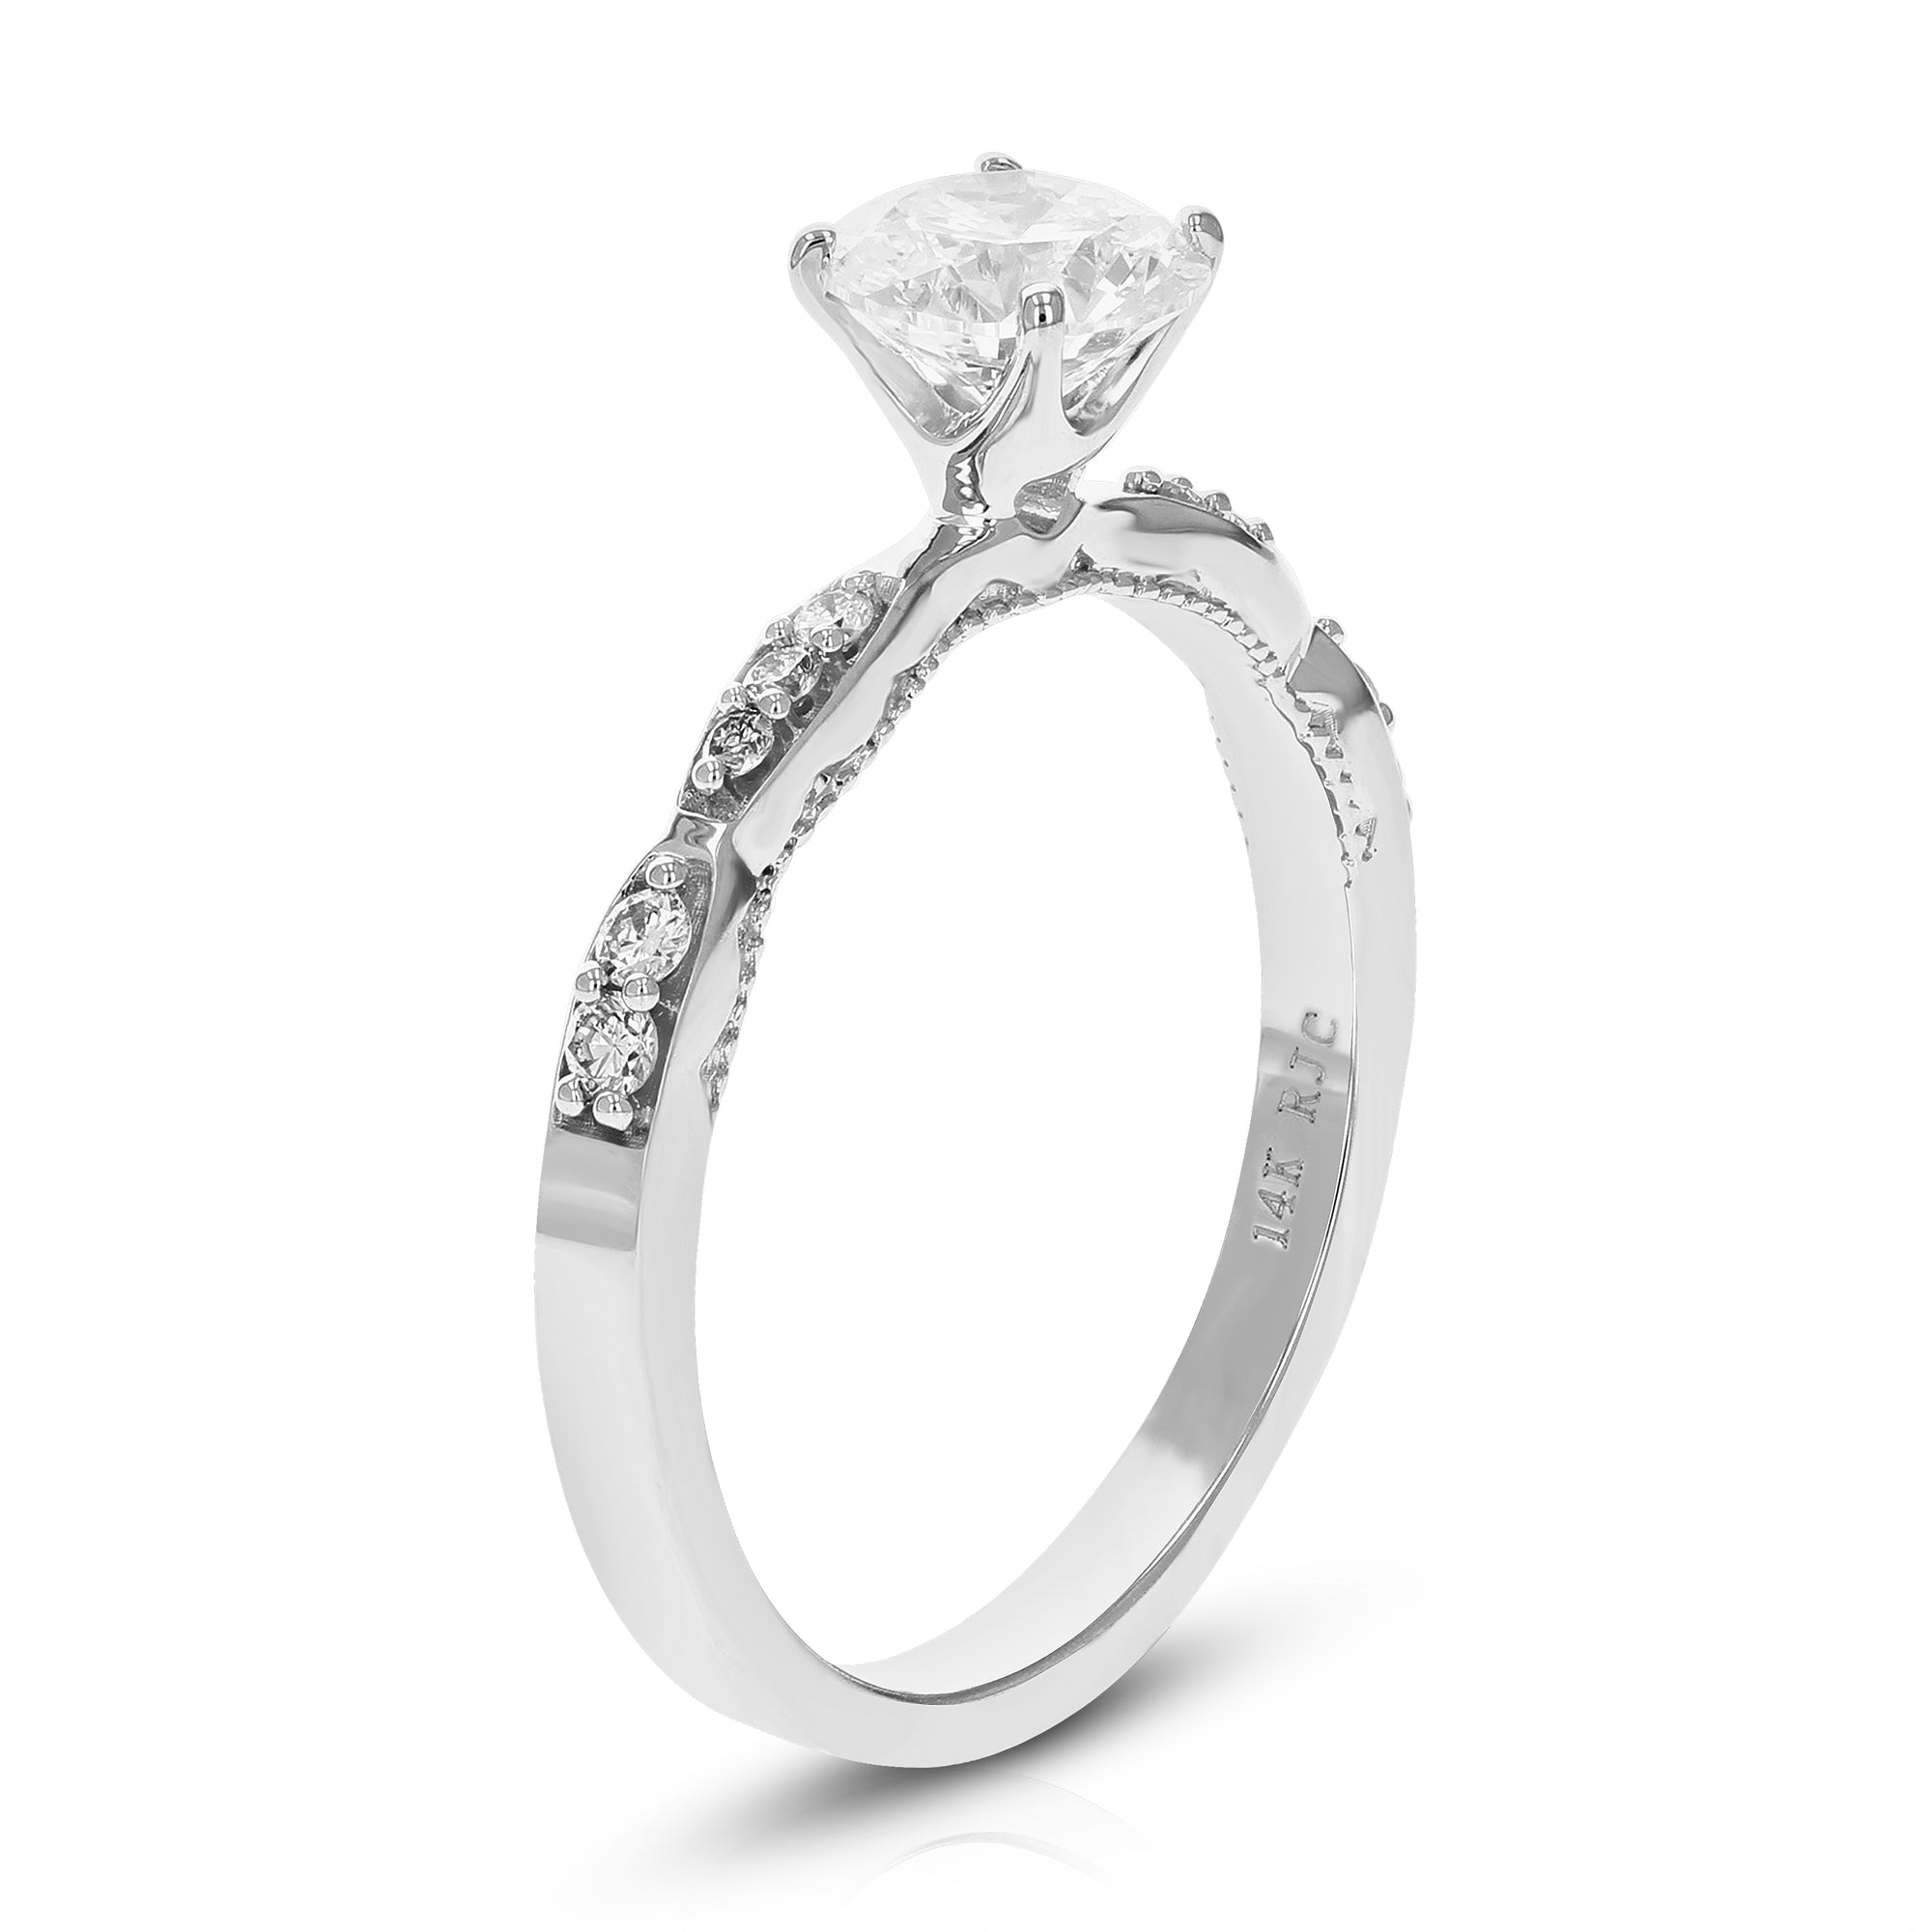 1 cttw Round Lab Grown Diamond Engagement Ring 11 Stones 14K White Gold Prong Set 3/4 Inch